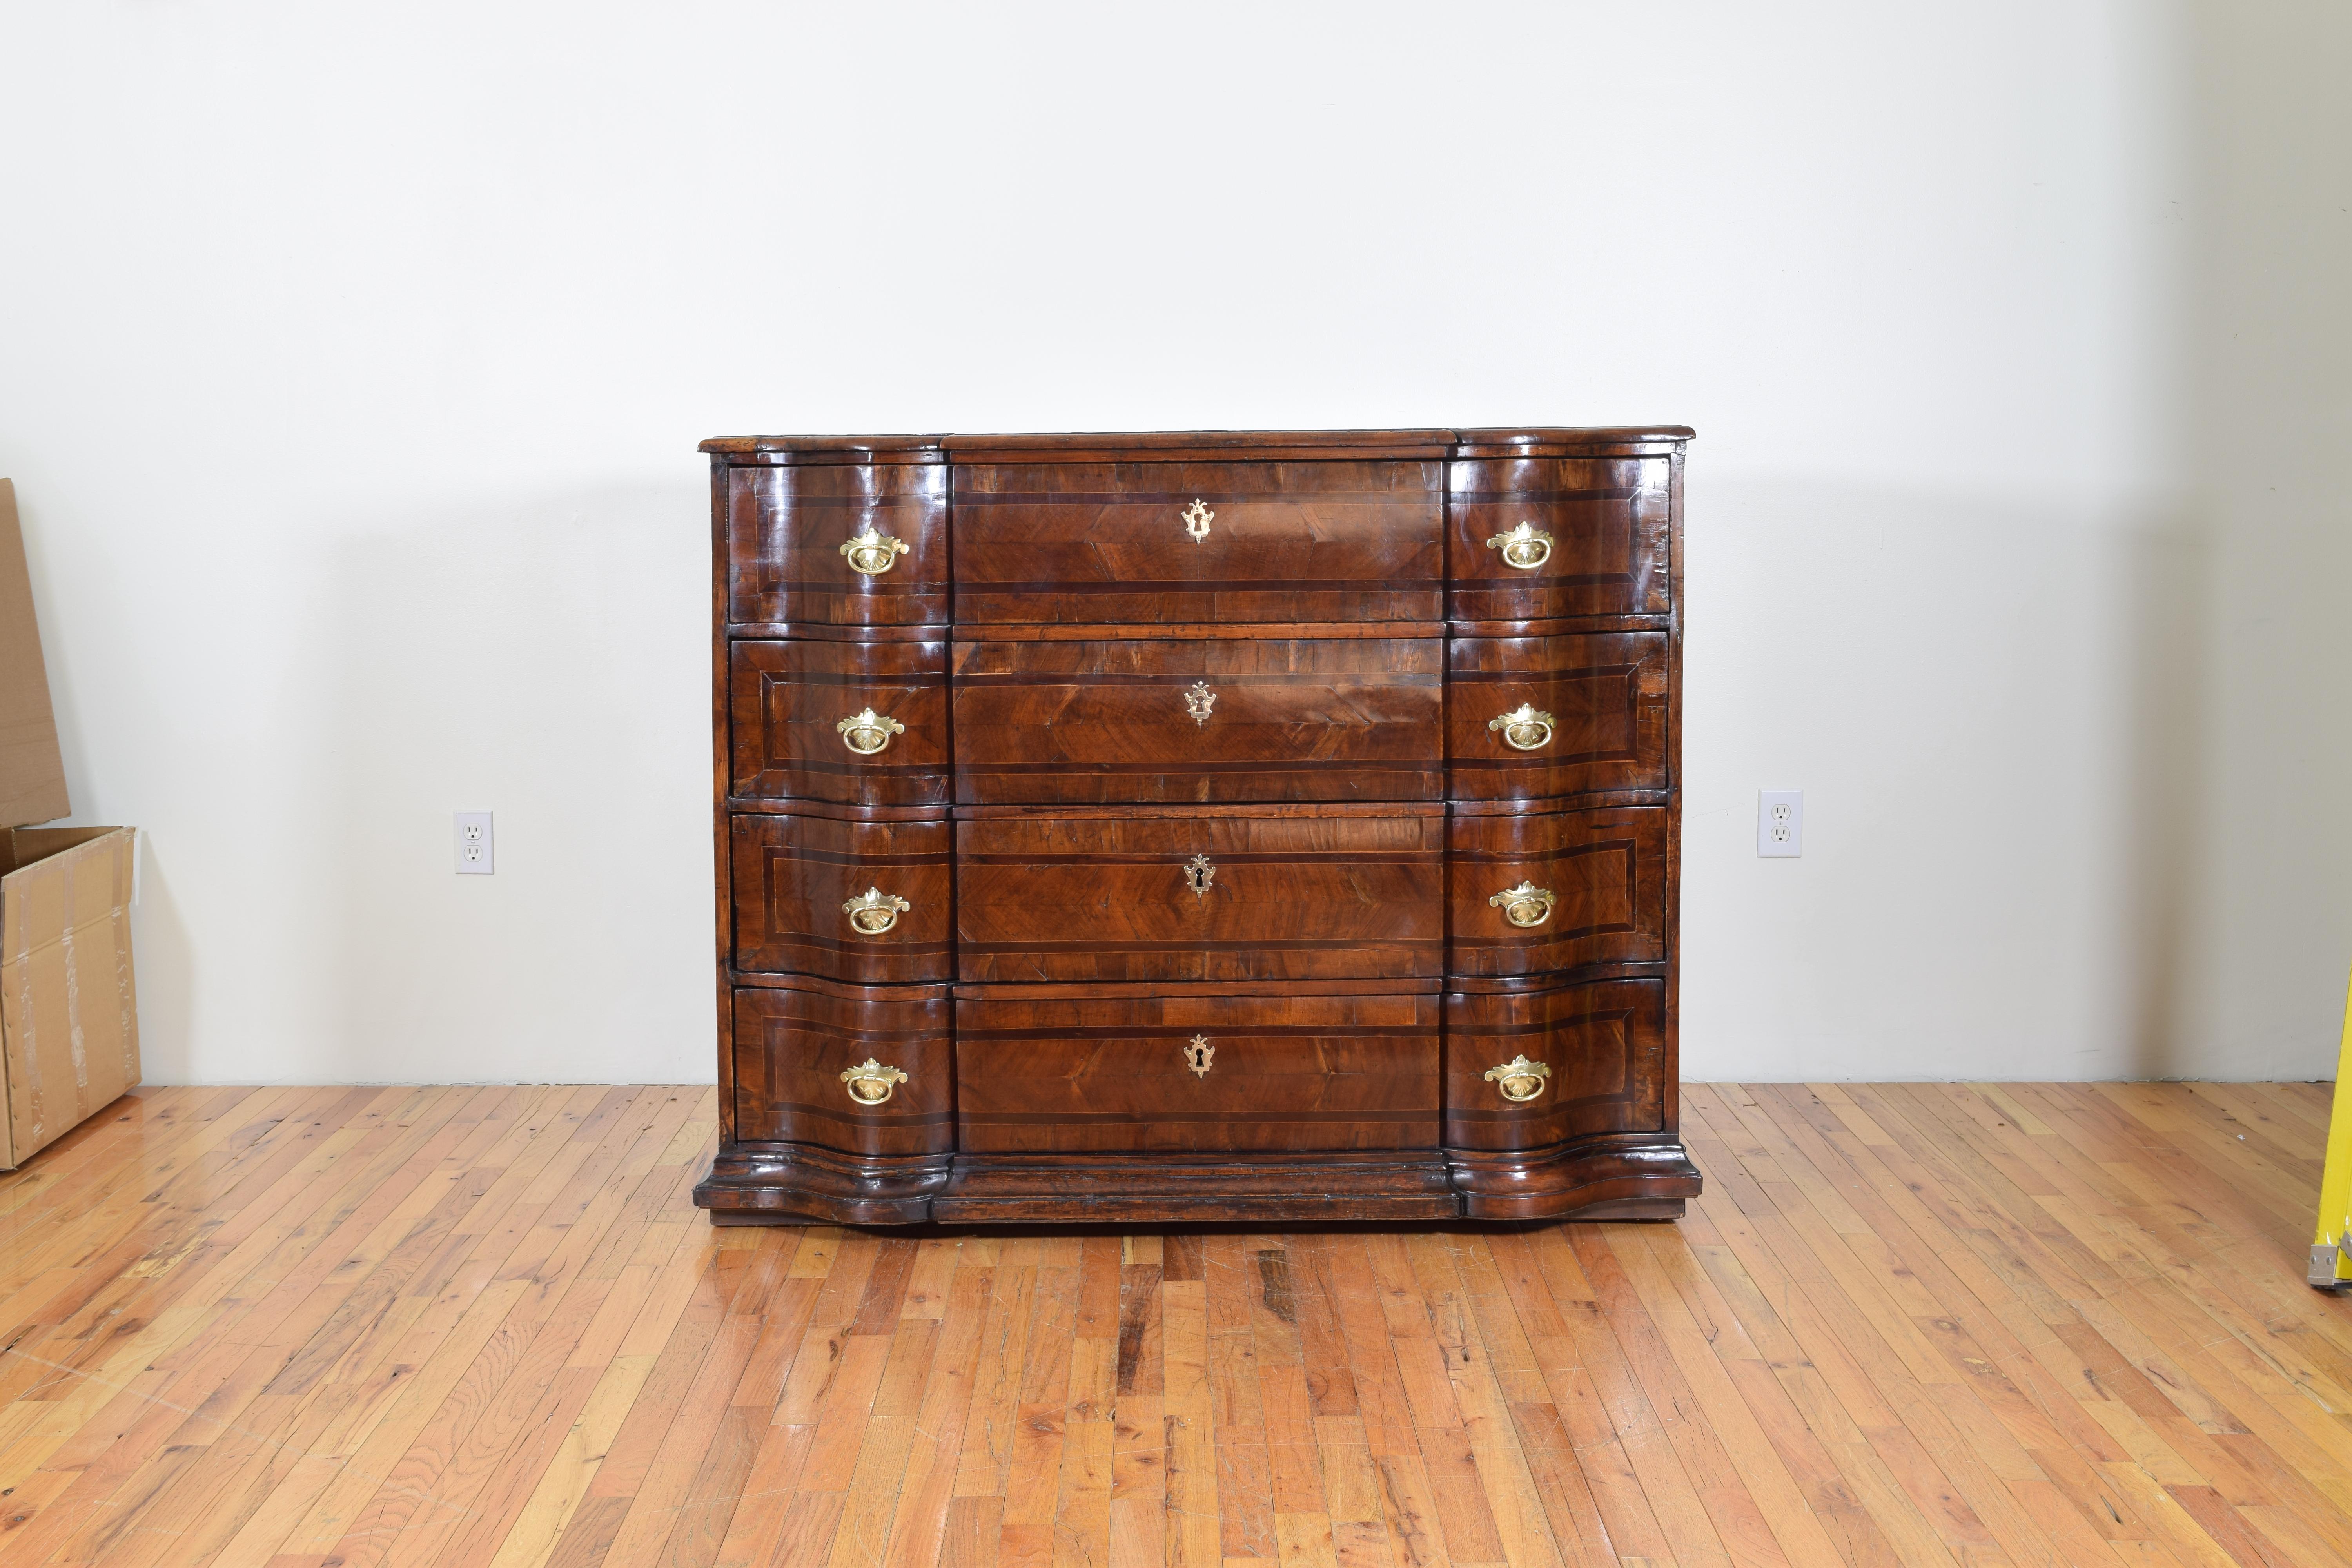 This magnificent commmode has a top shaped in the form of an archer's bow slightly rounding back and then straightening at the corners, the confomring case housing 4 drawers and having a plinth base atop hidden riser feet, the commode is sheathed in